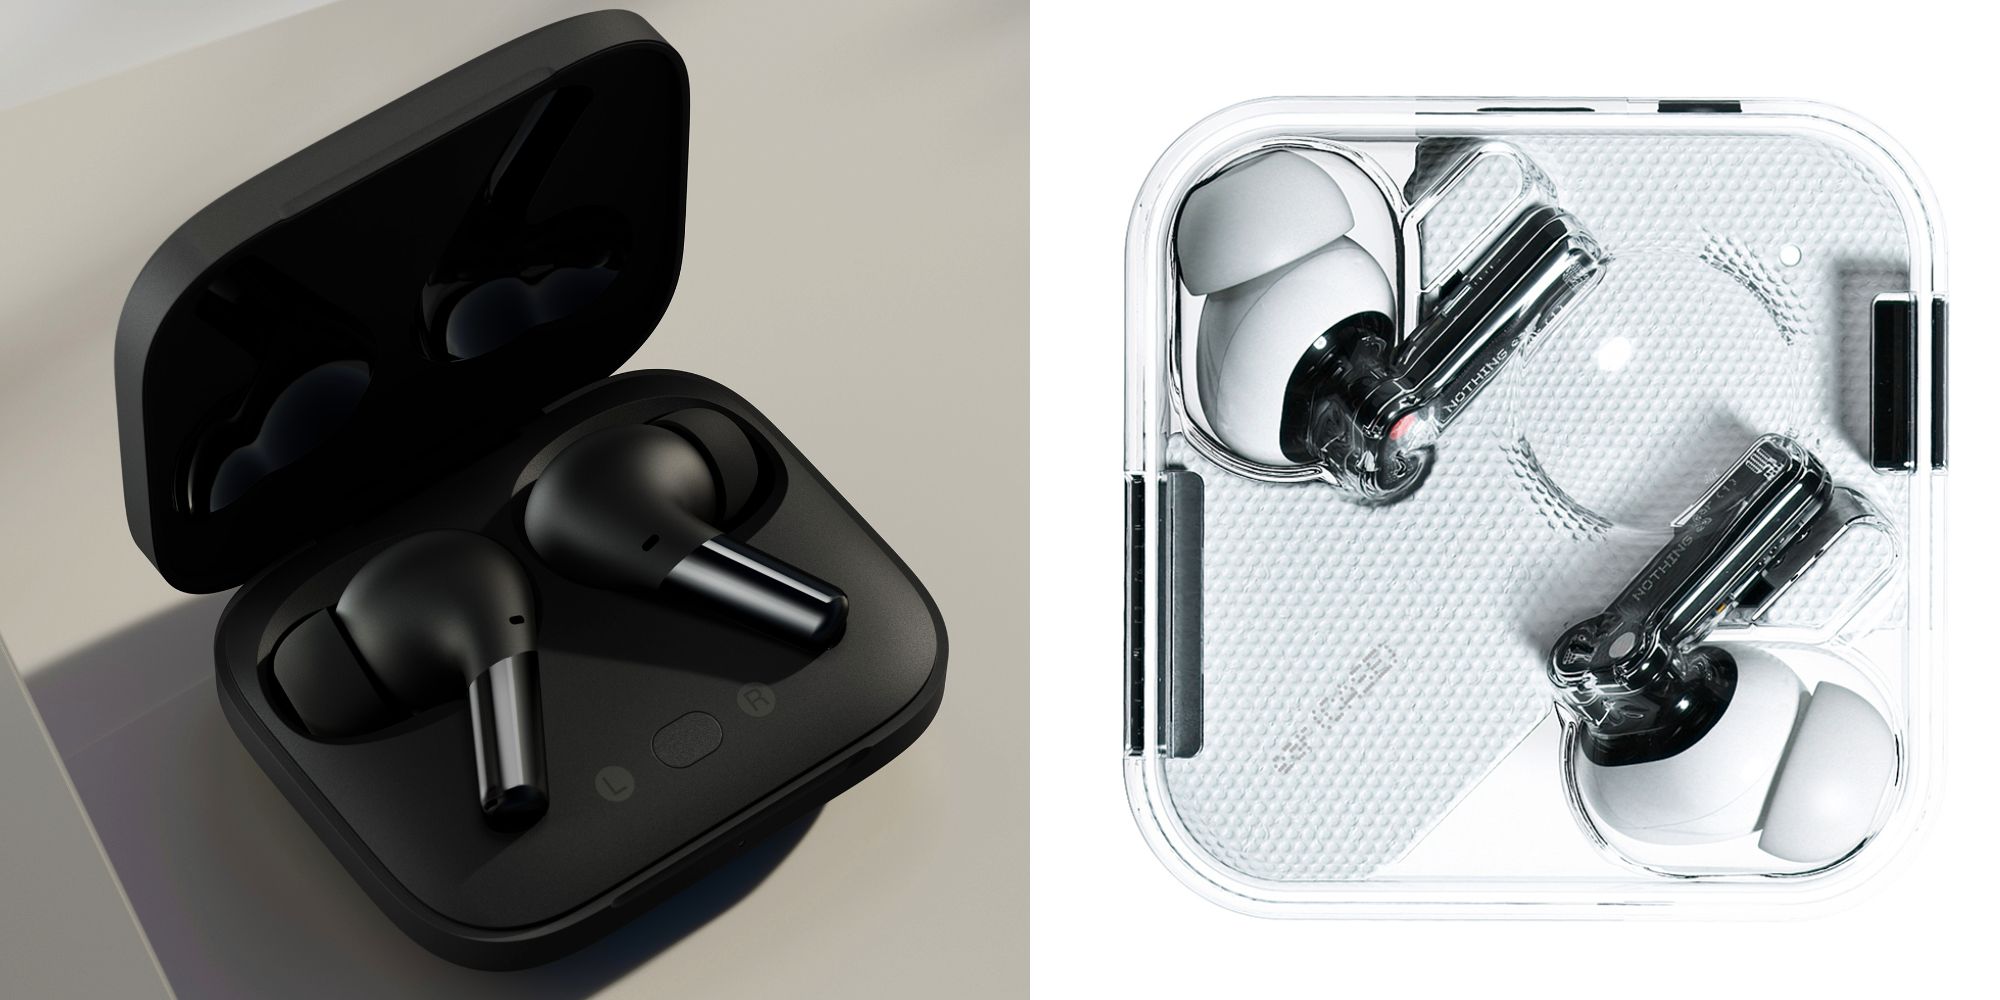 OnePlus Buds Pro Vs. Nothing Ear (1): Which Earbuds Should You Buy?